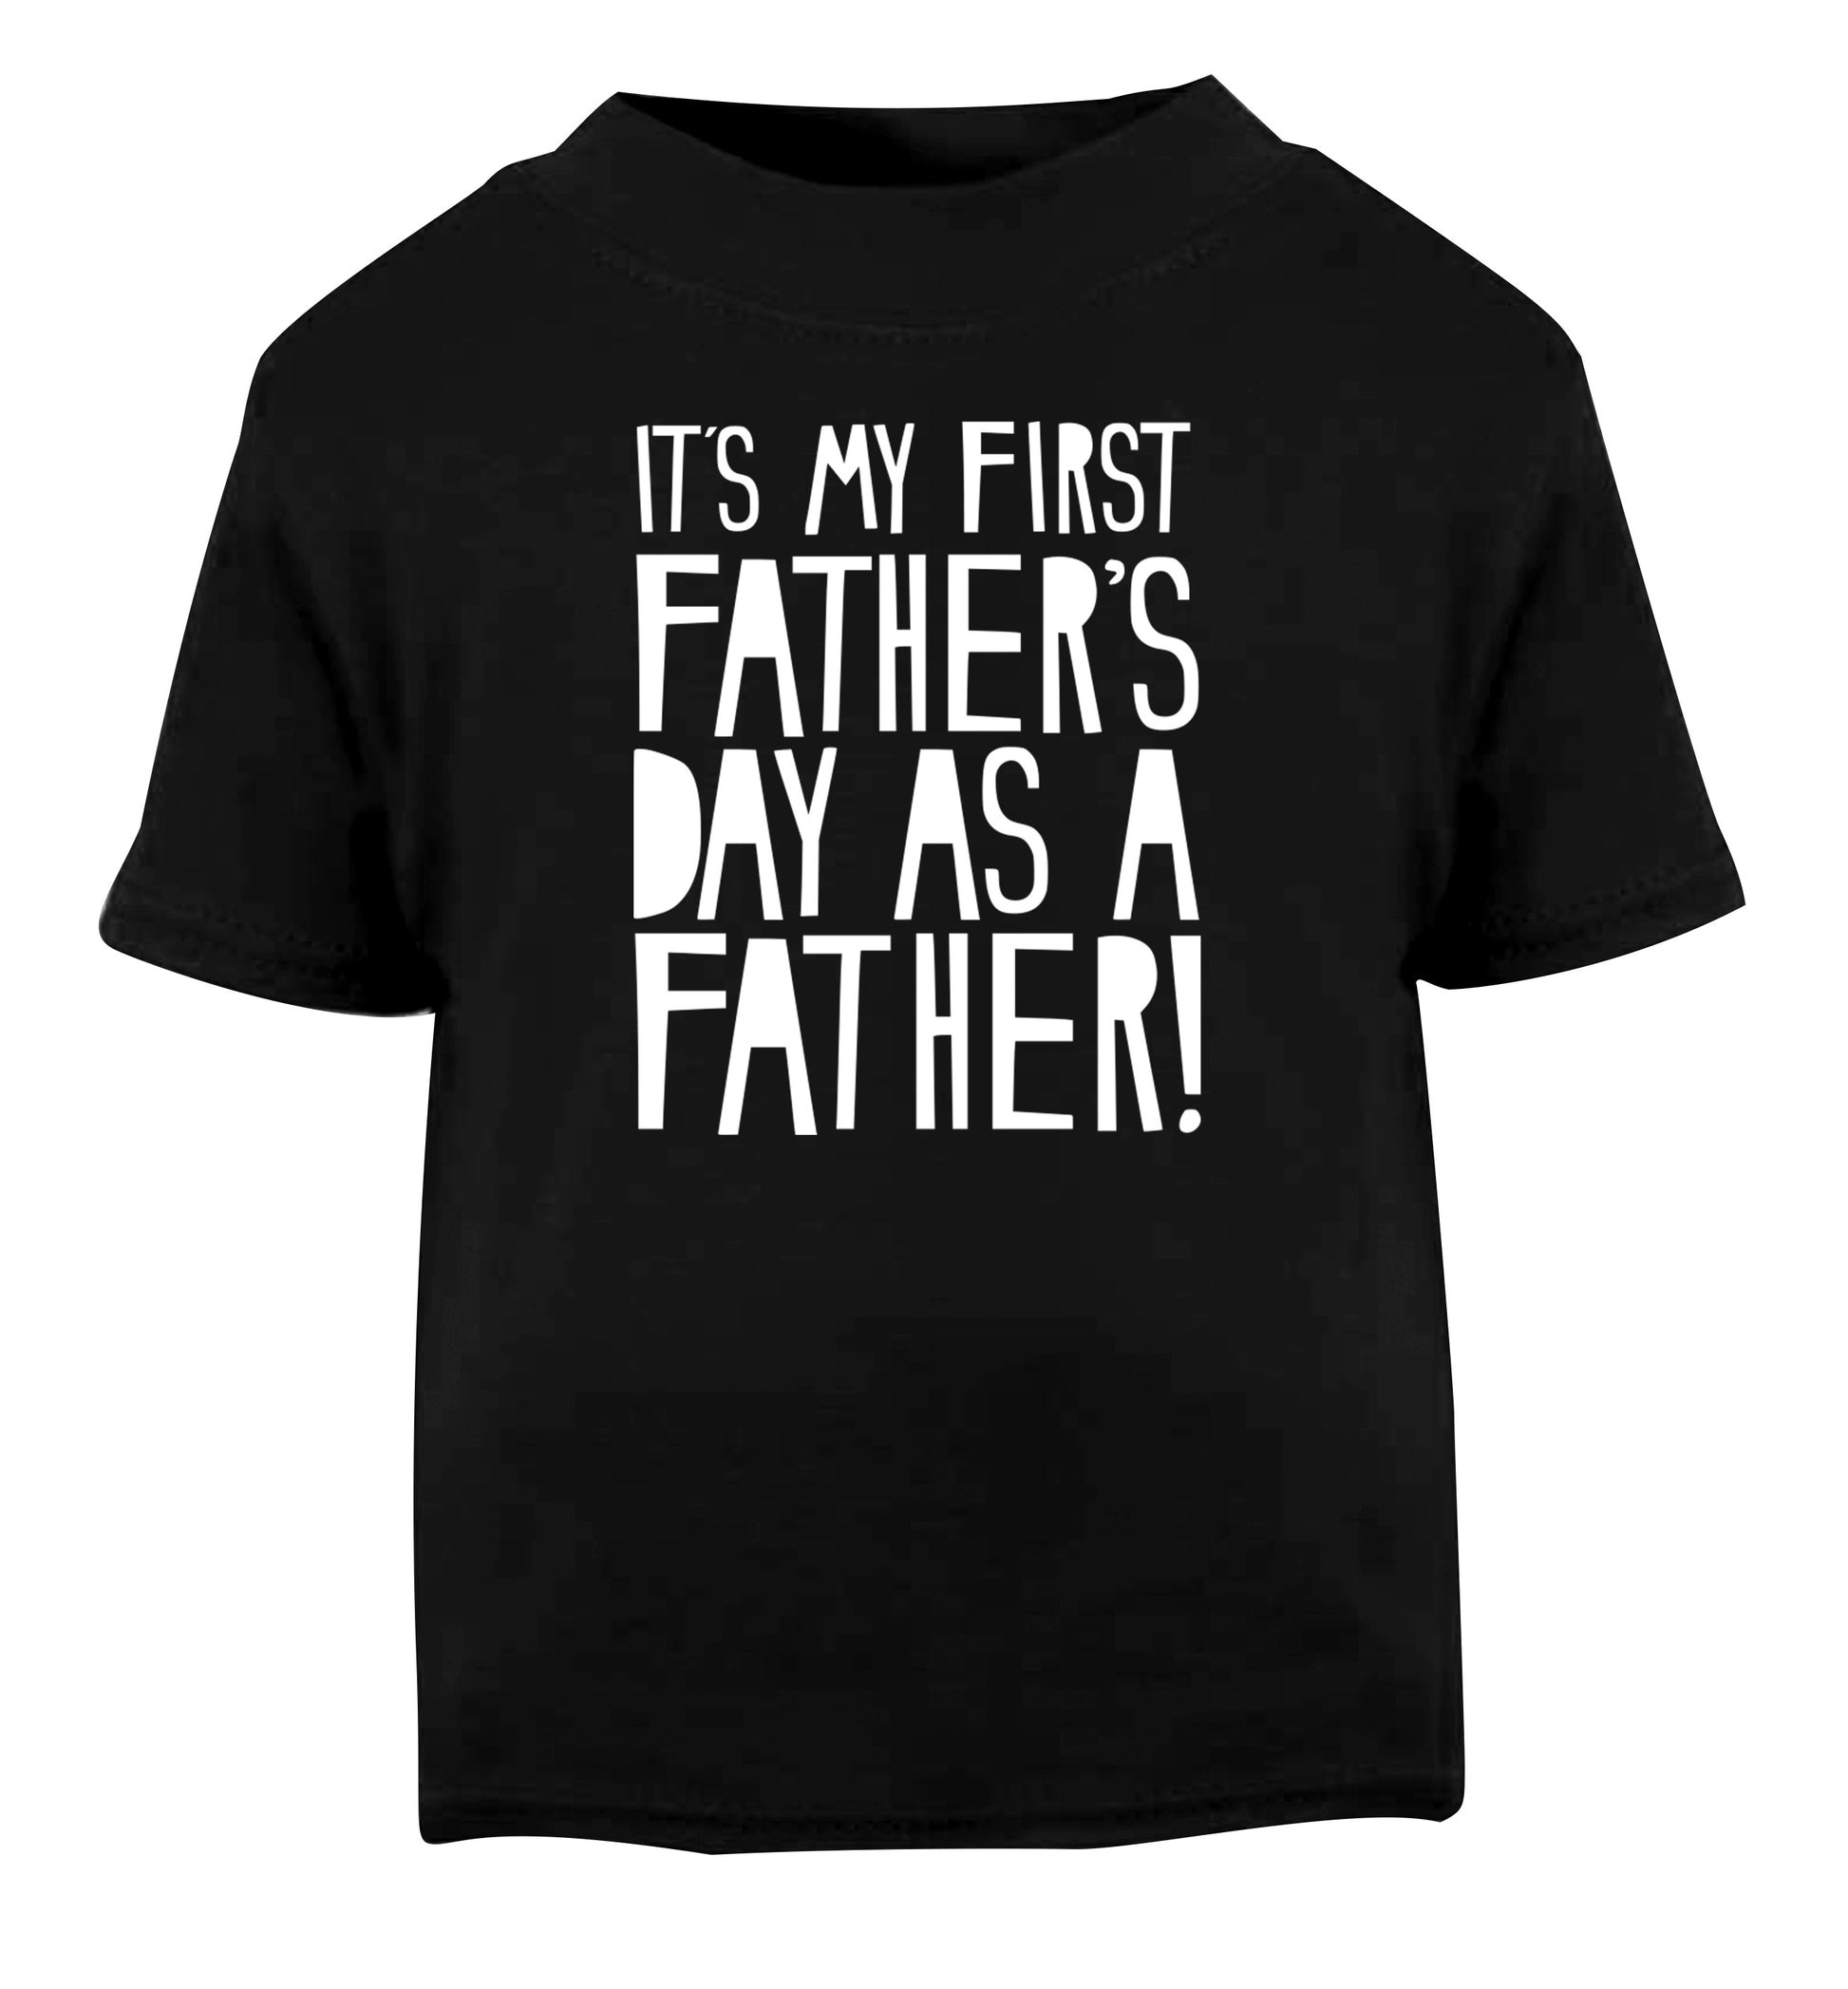 It's my first Father's Day as a father! Black Baby Toddler Tshirt 2 years